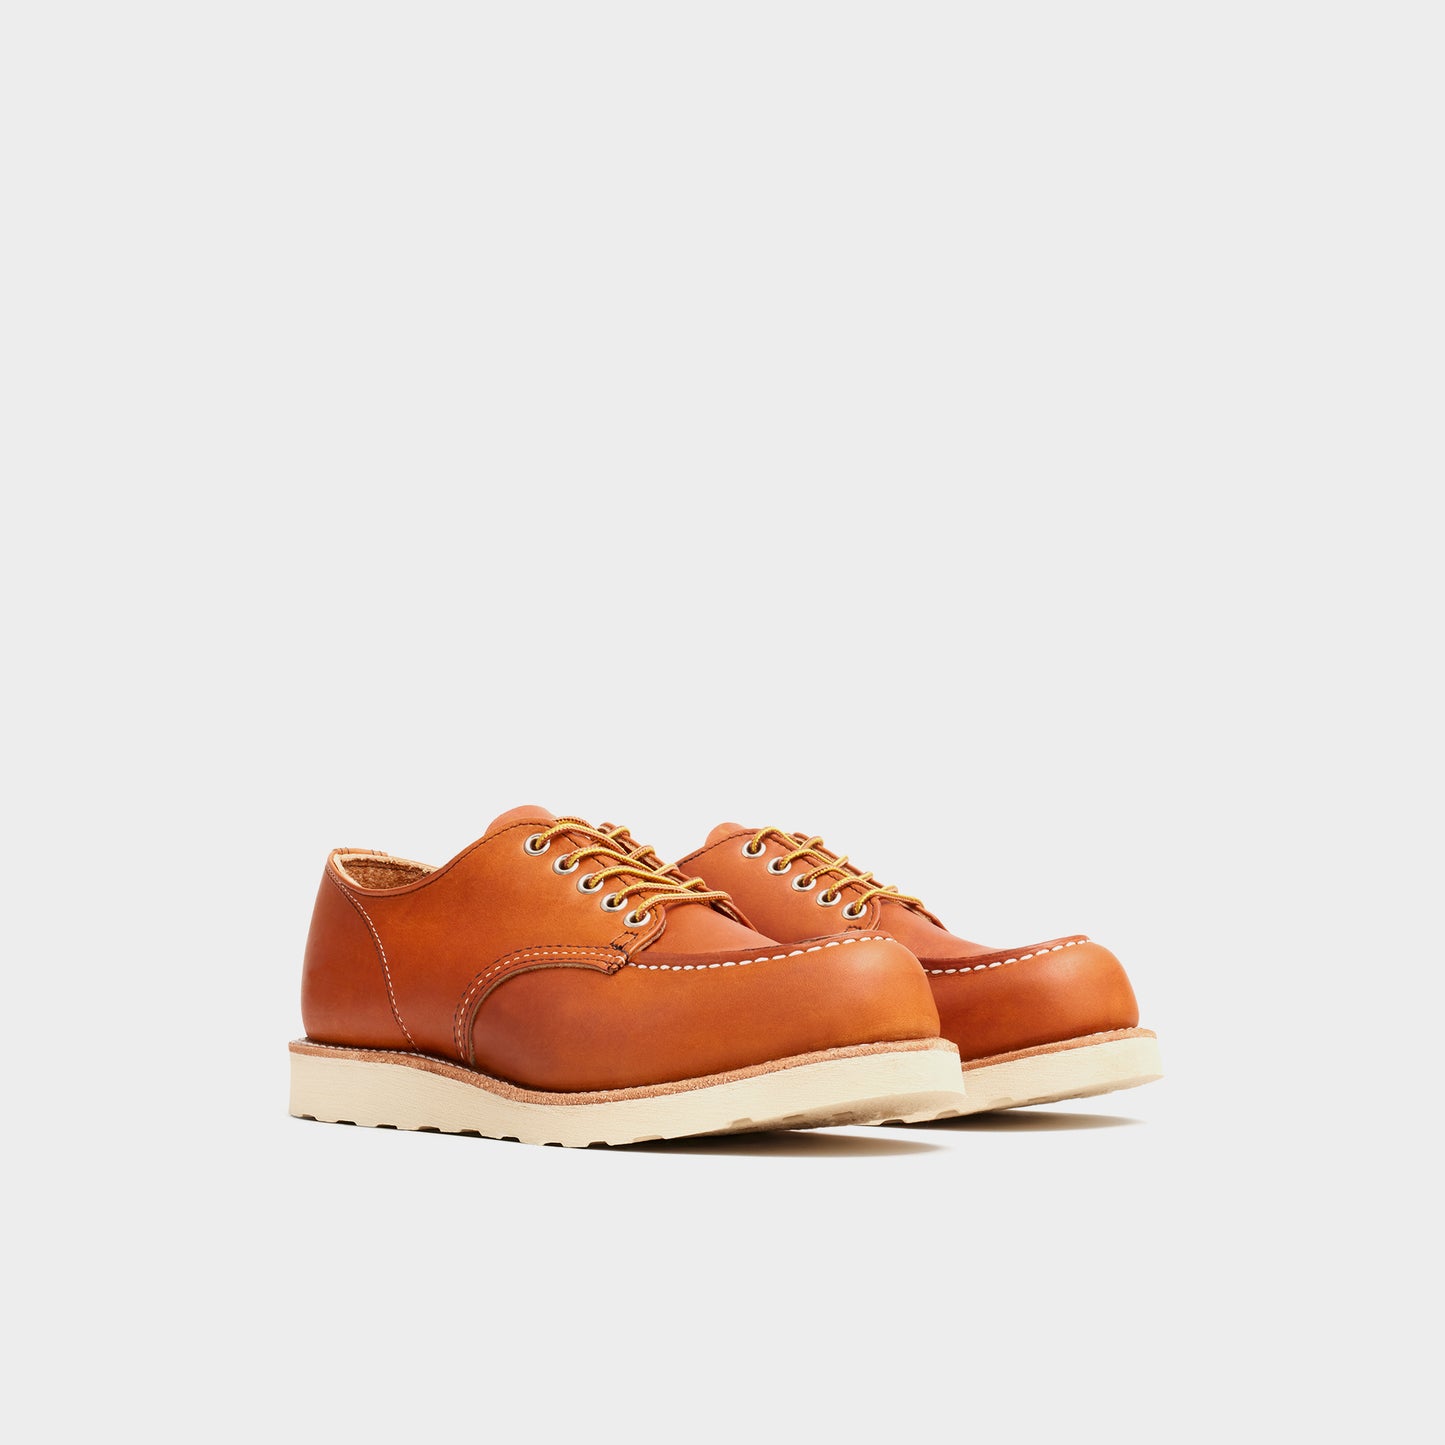 Red Wing Shop Moc Oxford 8092 in Farbe legacy_oro